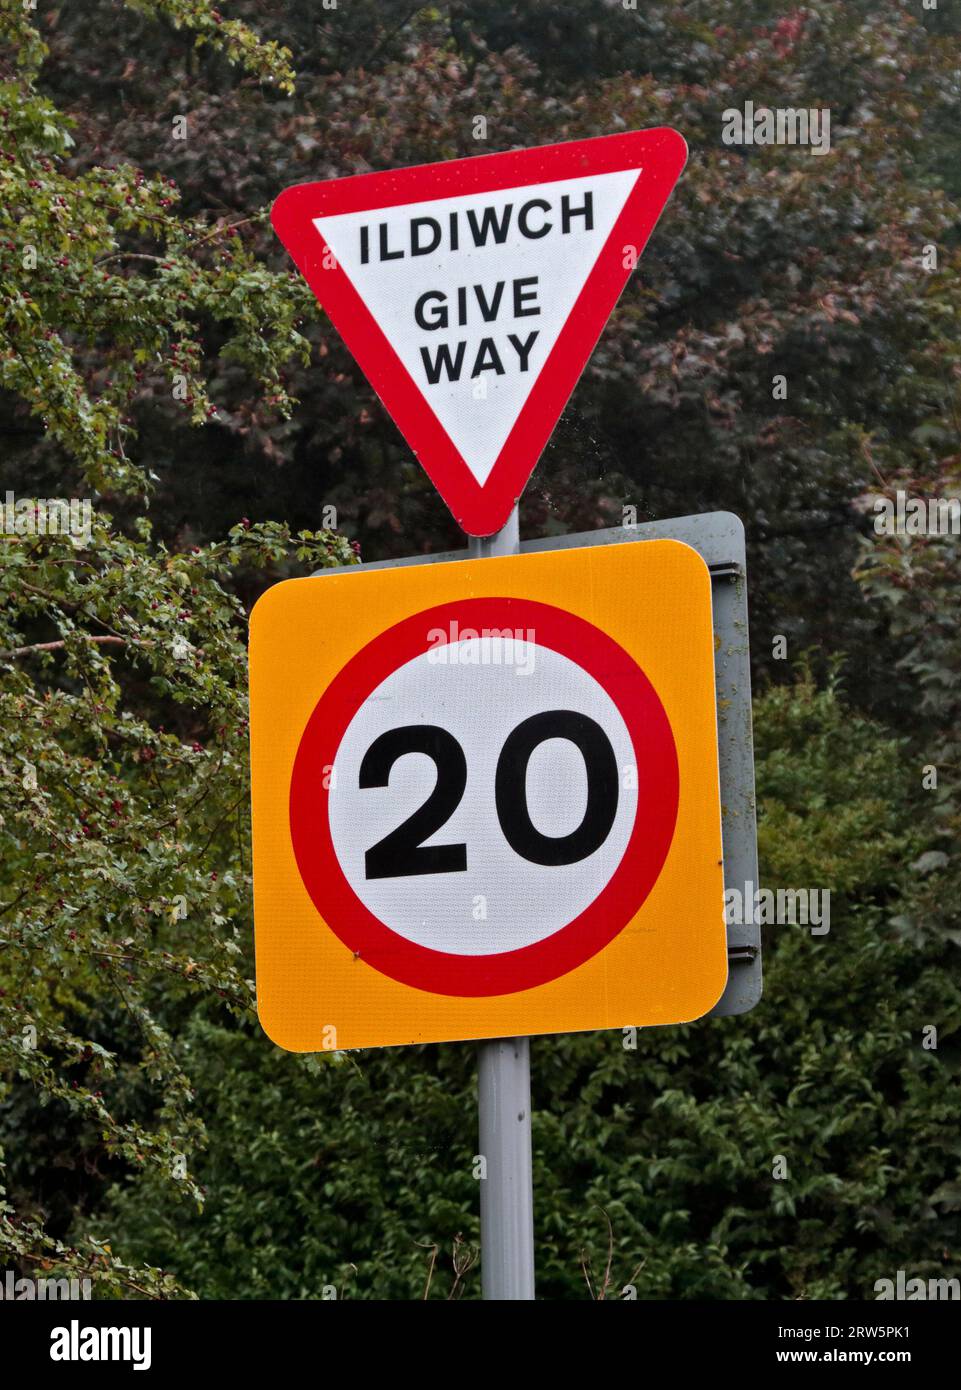 Wales New 20 mph Urban Speed Limit and Give Way Sign, Southsea, in der Nähe von Wrexham, Wales Stockfoto